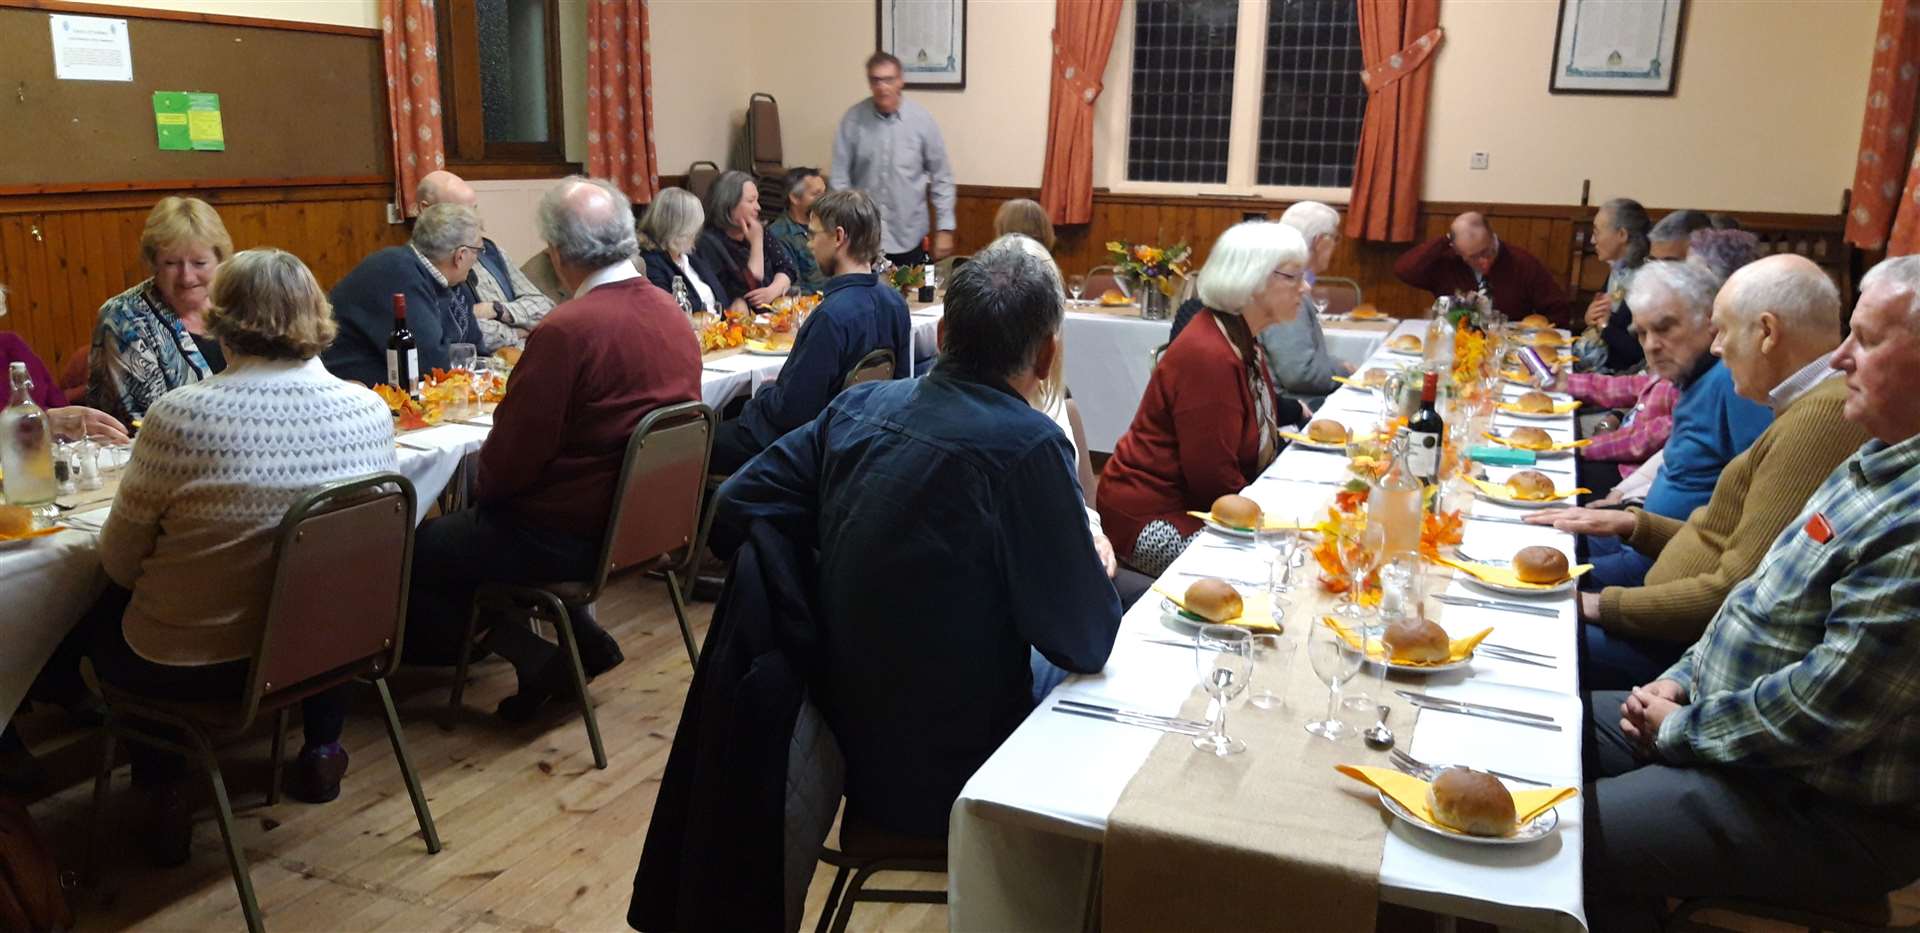 The 40th anniversary dinner was held at the Church of Scotland Hall in Brora.